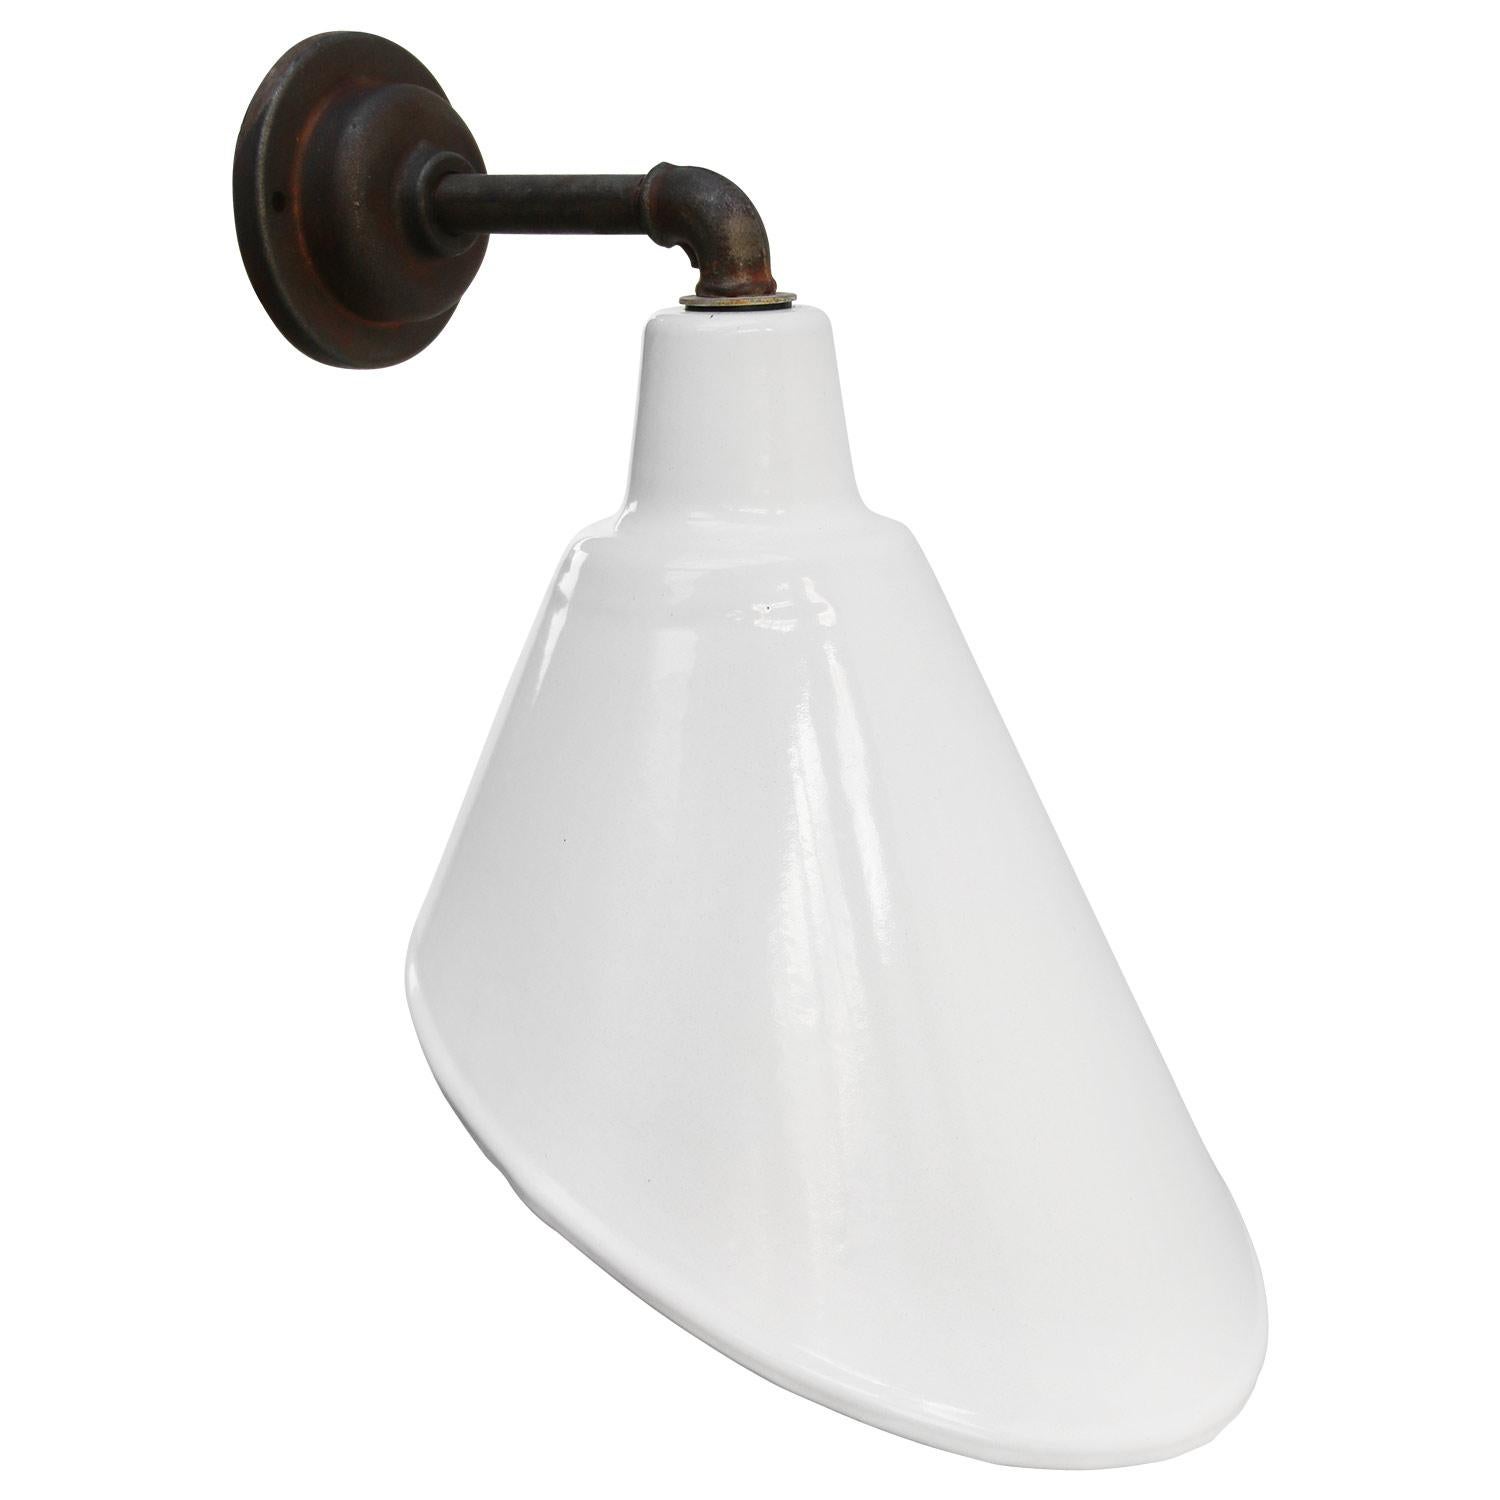 Factory wall light
White enamel, white interior

diameter cast iron wall piece: 10.5 cm / 4”.
2 holes to secure

E27/E26

Weight: 2.00 kg / 4.4 lb

Priced per individual item. All lamps have been made suitable by international standards for